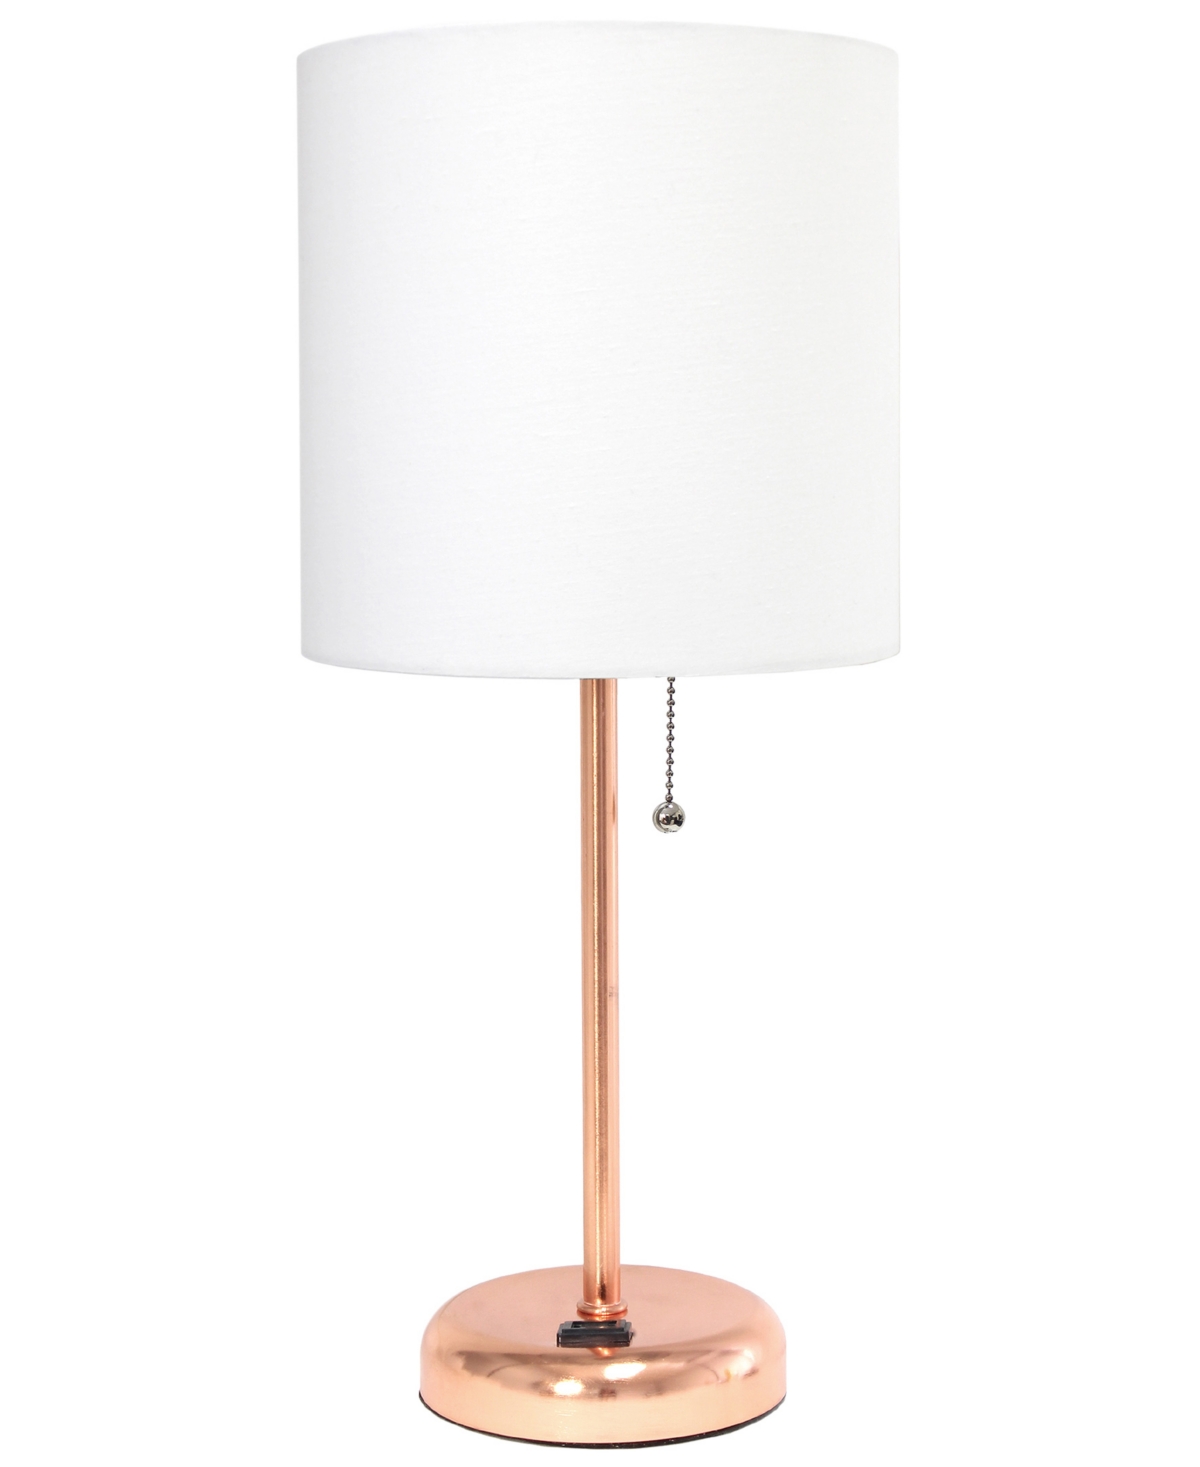 Shop Creekwood Home Oslo 19.5" Contemporary Bedside Power Outlet Base Standard Metal Table Desk Lamp In Multi